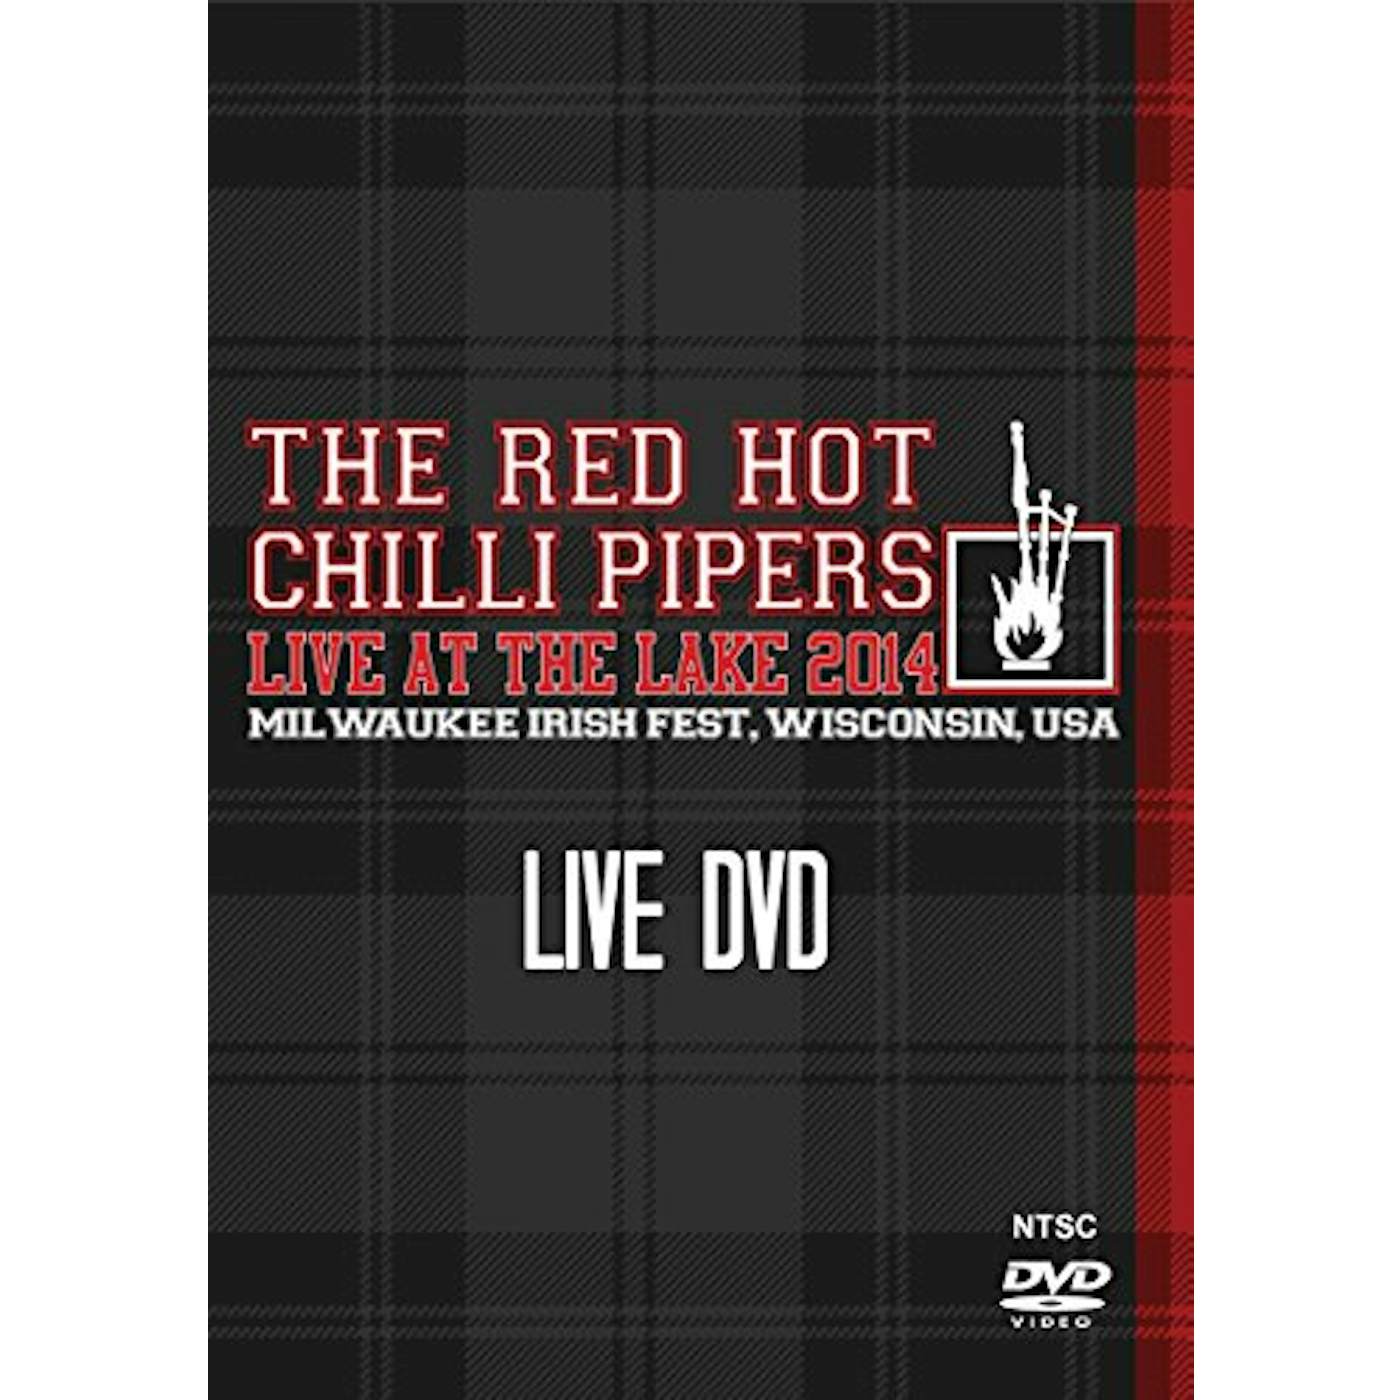 Red Hot Chilli Pipers LIVE AT THE LAKE 2014 DVD